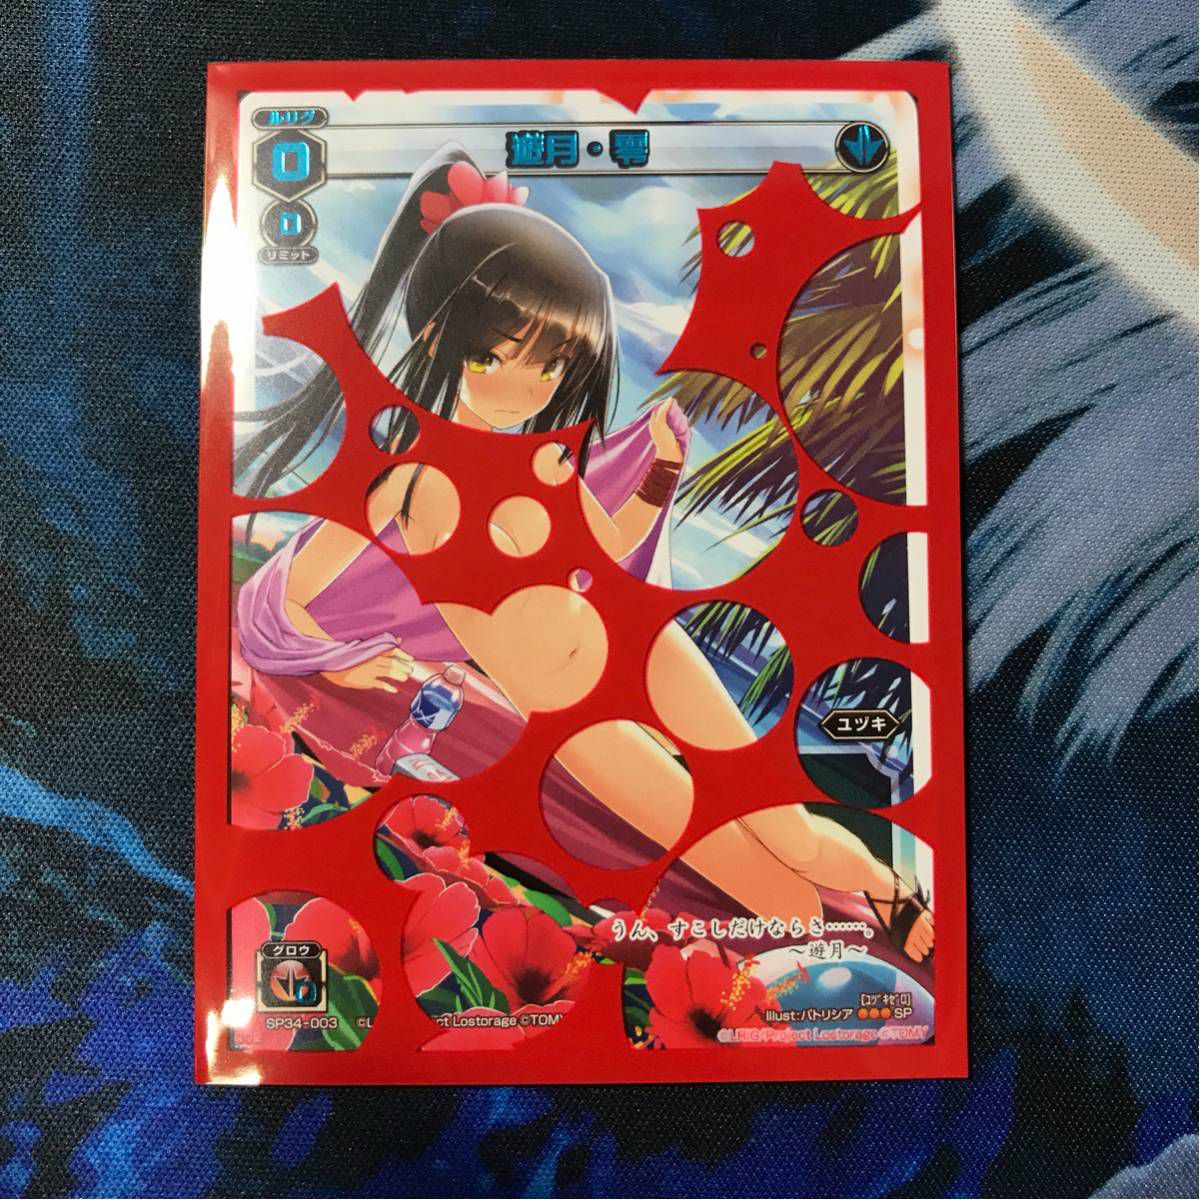 [Good news] recent card games, too many erotic cards wwwwww 6